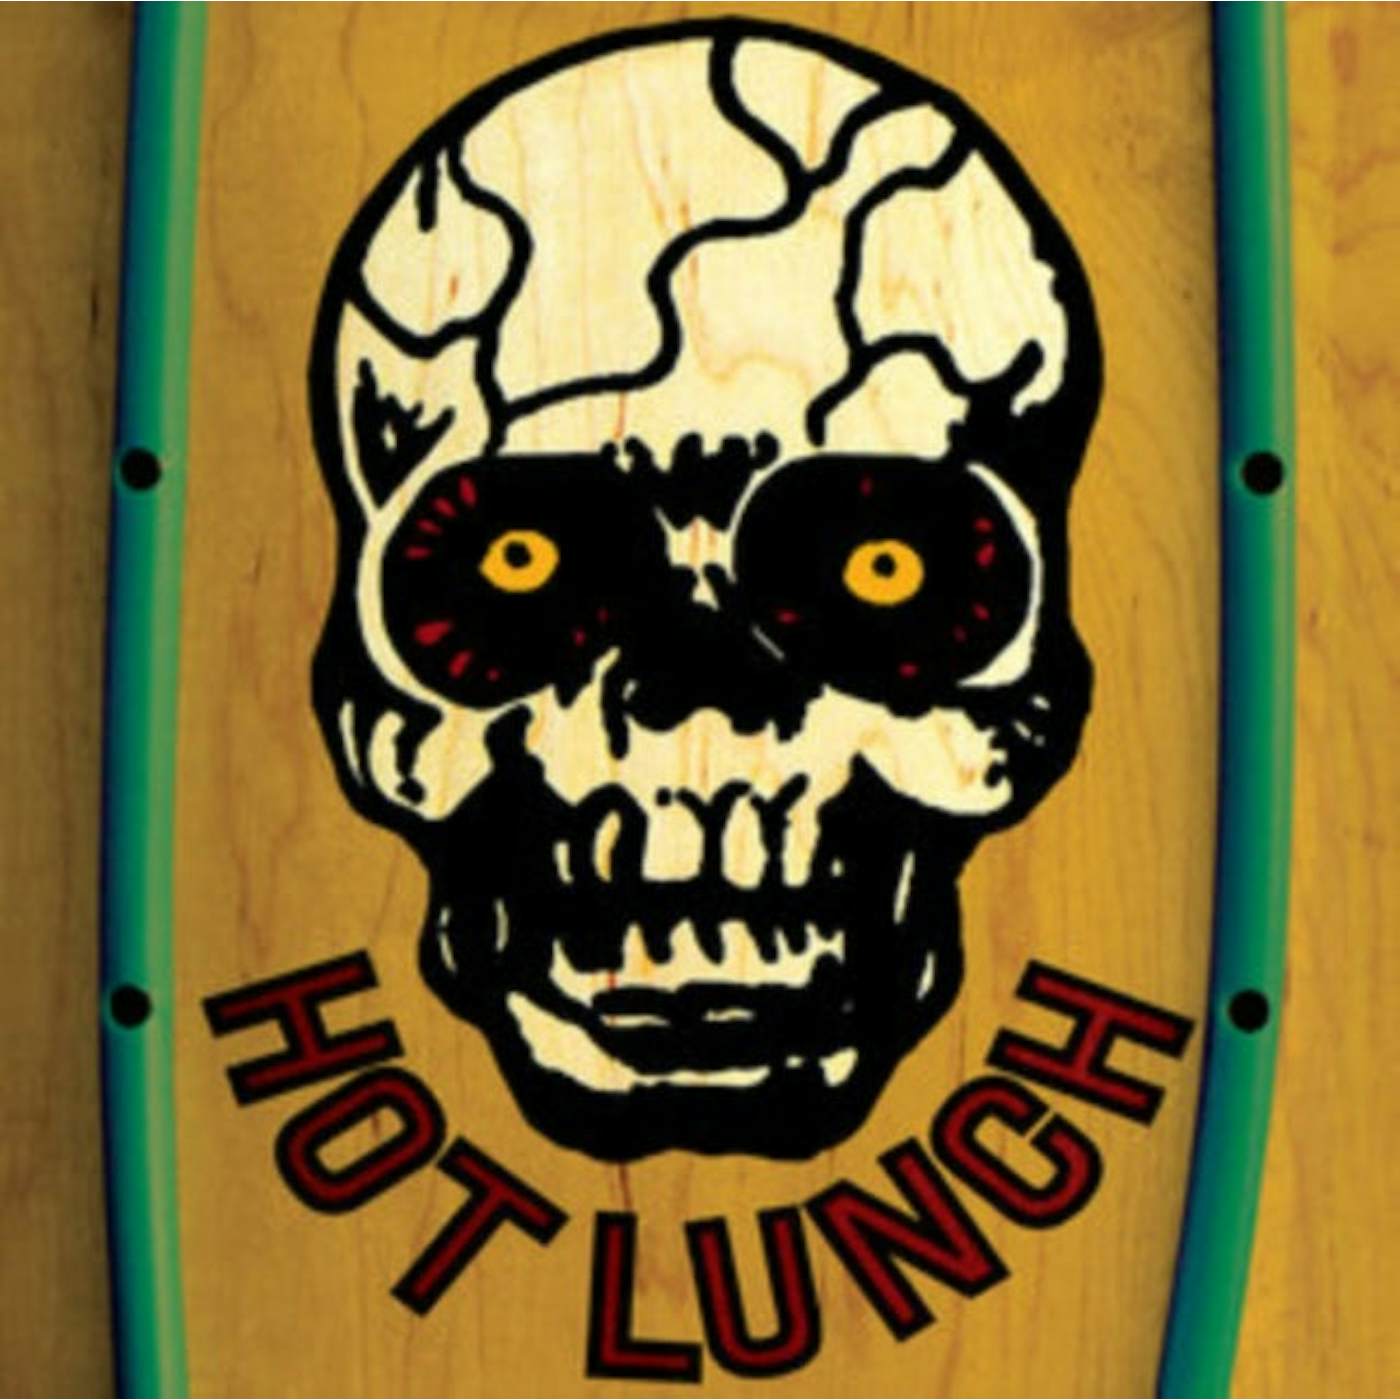 Hot Lunch LP - Hot Lunch (Coloured Vinyl)